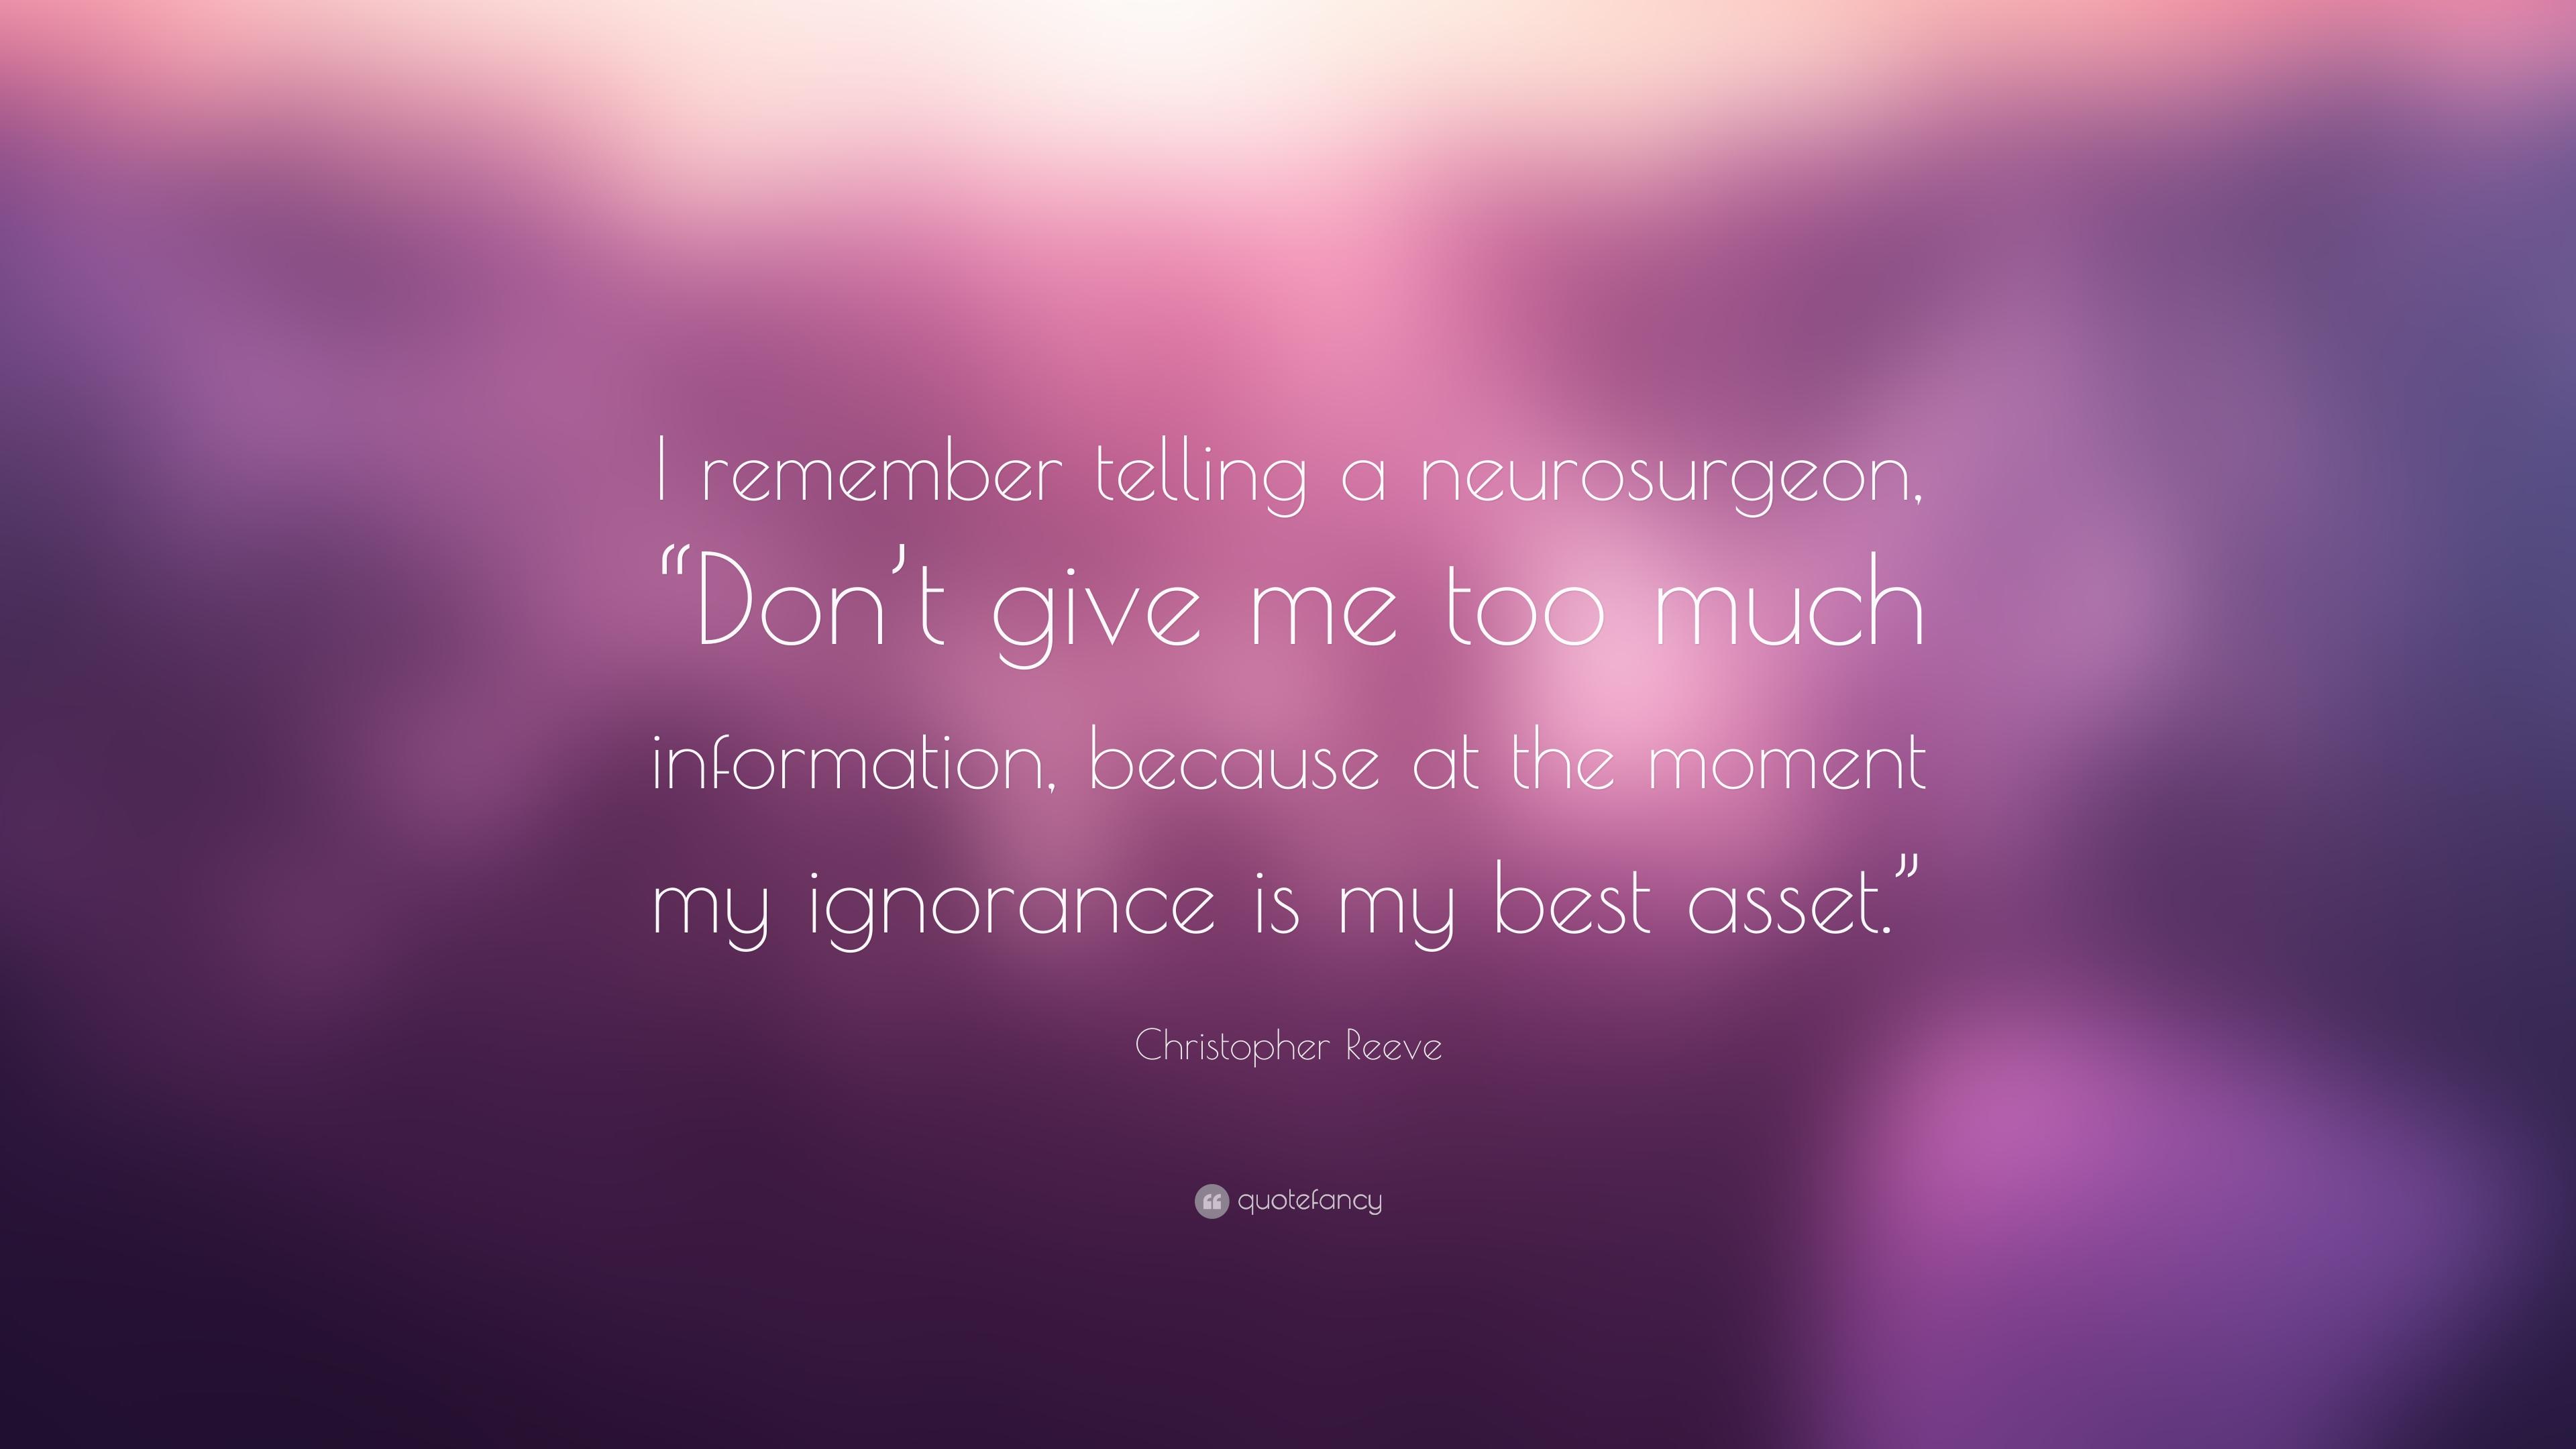 Christopher Reeve Quote: “I remember telling a neurosurgeon, “Don't